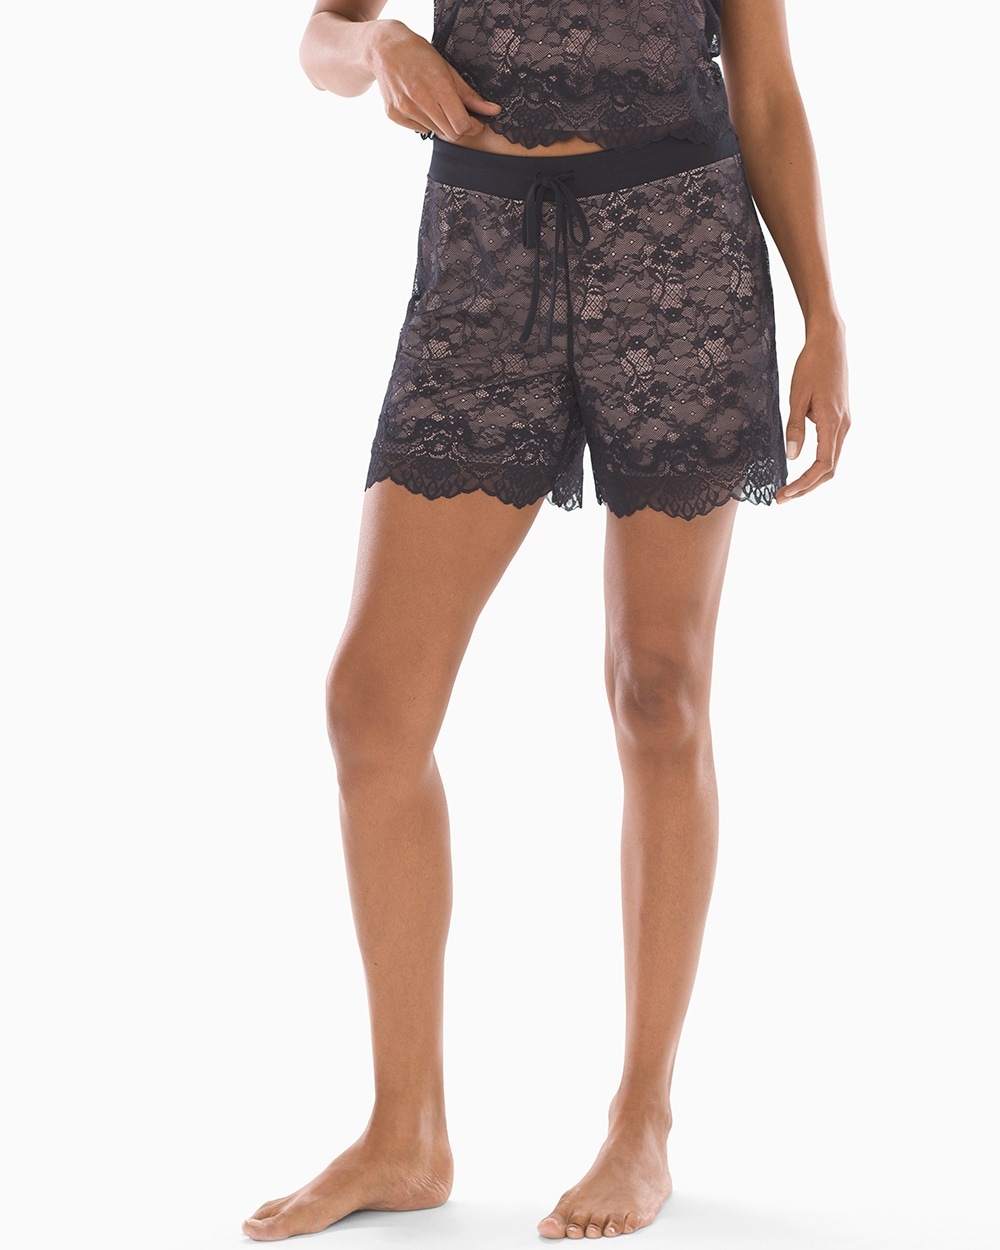 All Over Lace Sleep Shorts Black/Adobe Rose